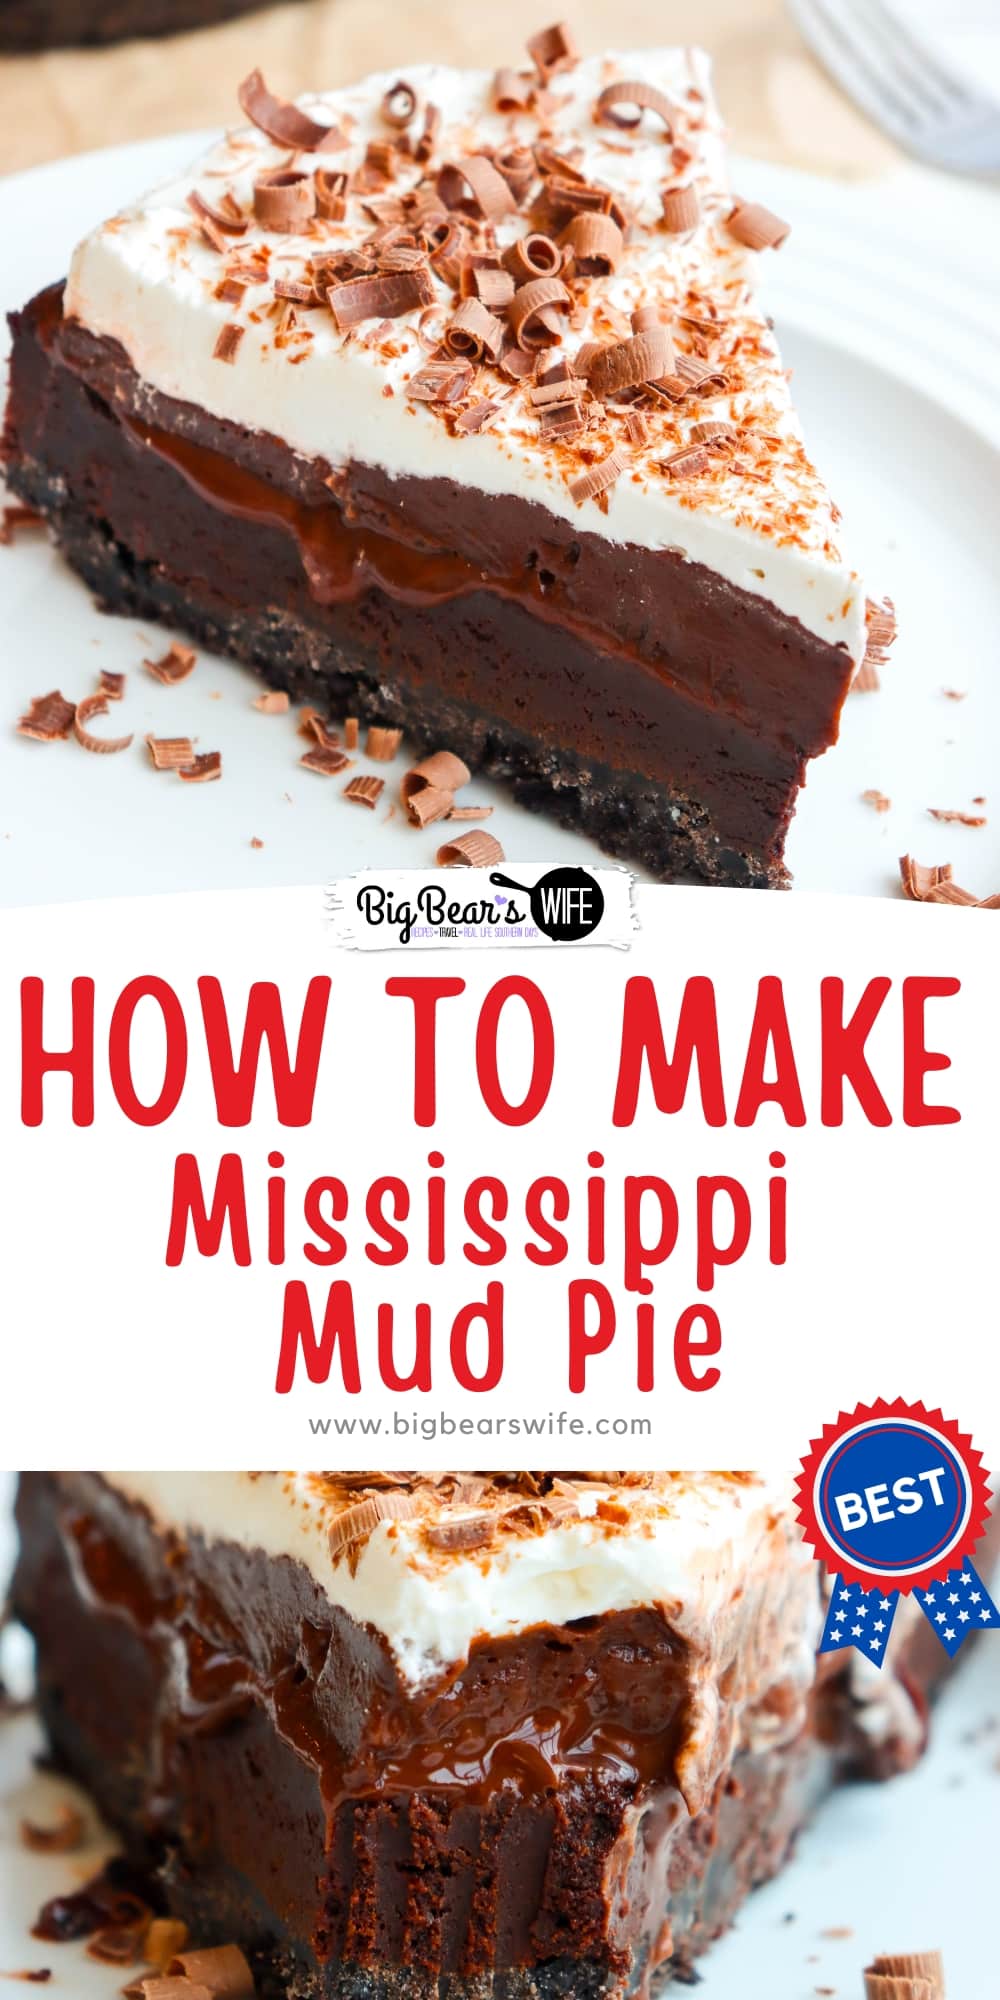 Calling all chocolate fanatics! Prepare to be blown away by the ultimate Mississippi Mud Pie recipe that will transport you to dessert heaven. Dive into a luscious chocolate crust, followed by layers of fudgy brownie, hot fudge sauce and chocolate pudding . Then it is finished with a homemade whipped cream topping and chocolate shavings. This is the dessert dreams are made of! via @bigbearswife